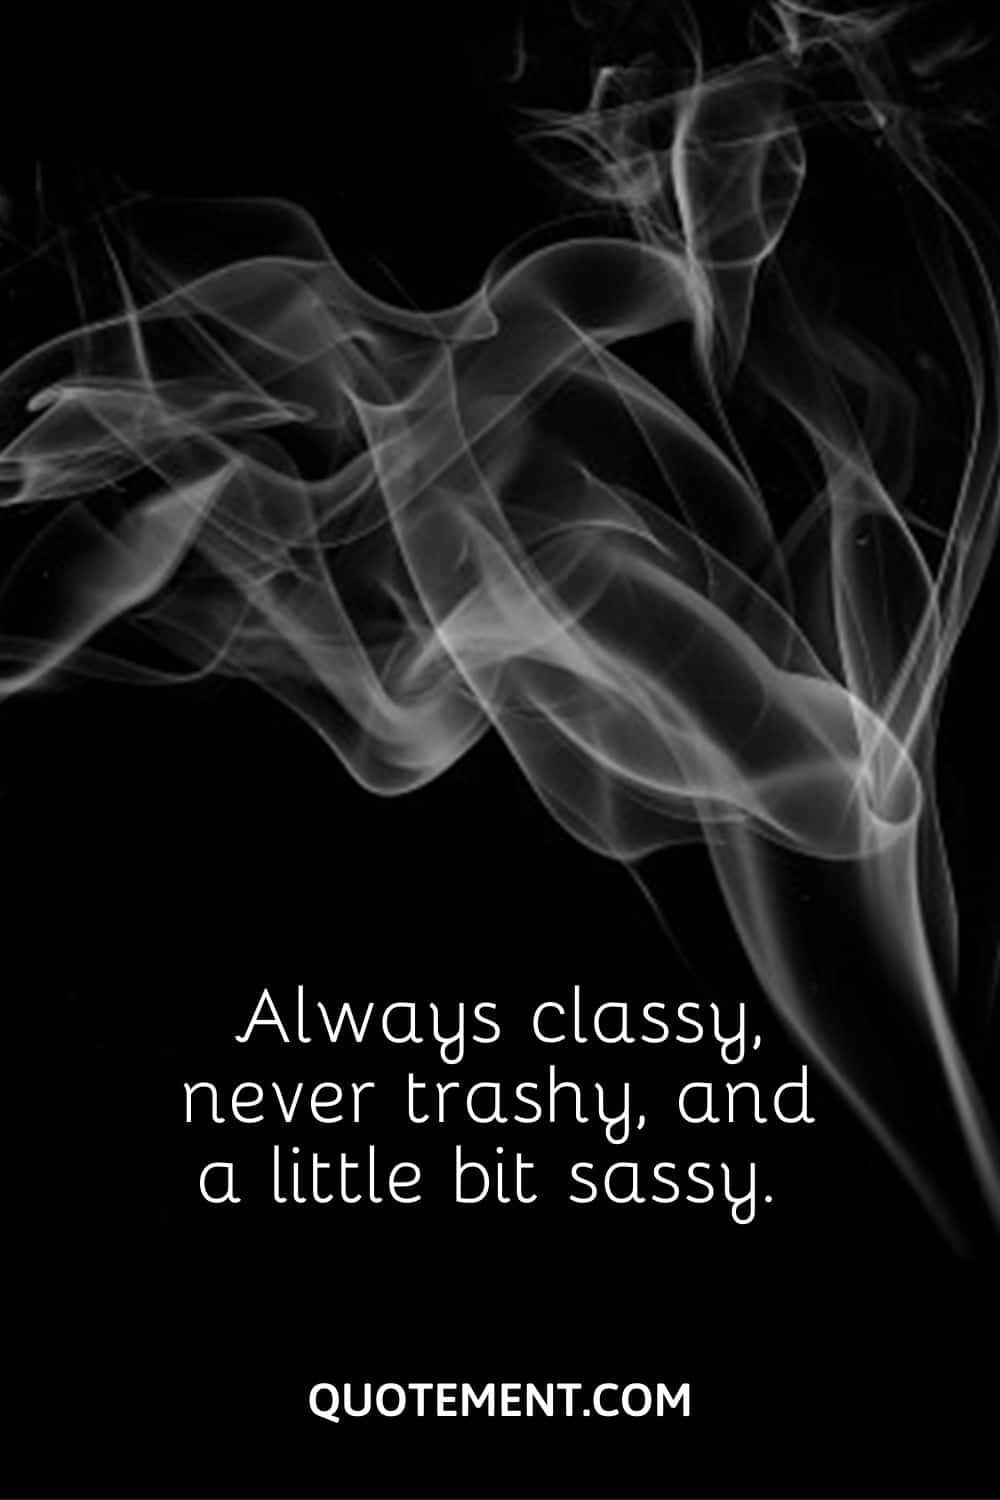 Always classy, never trashy, and a little bit sassy.